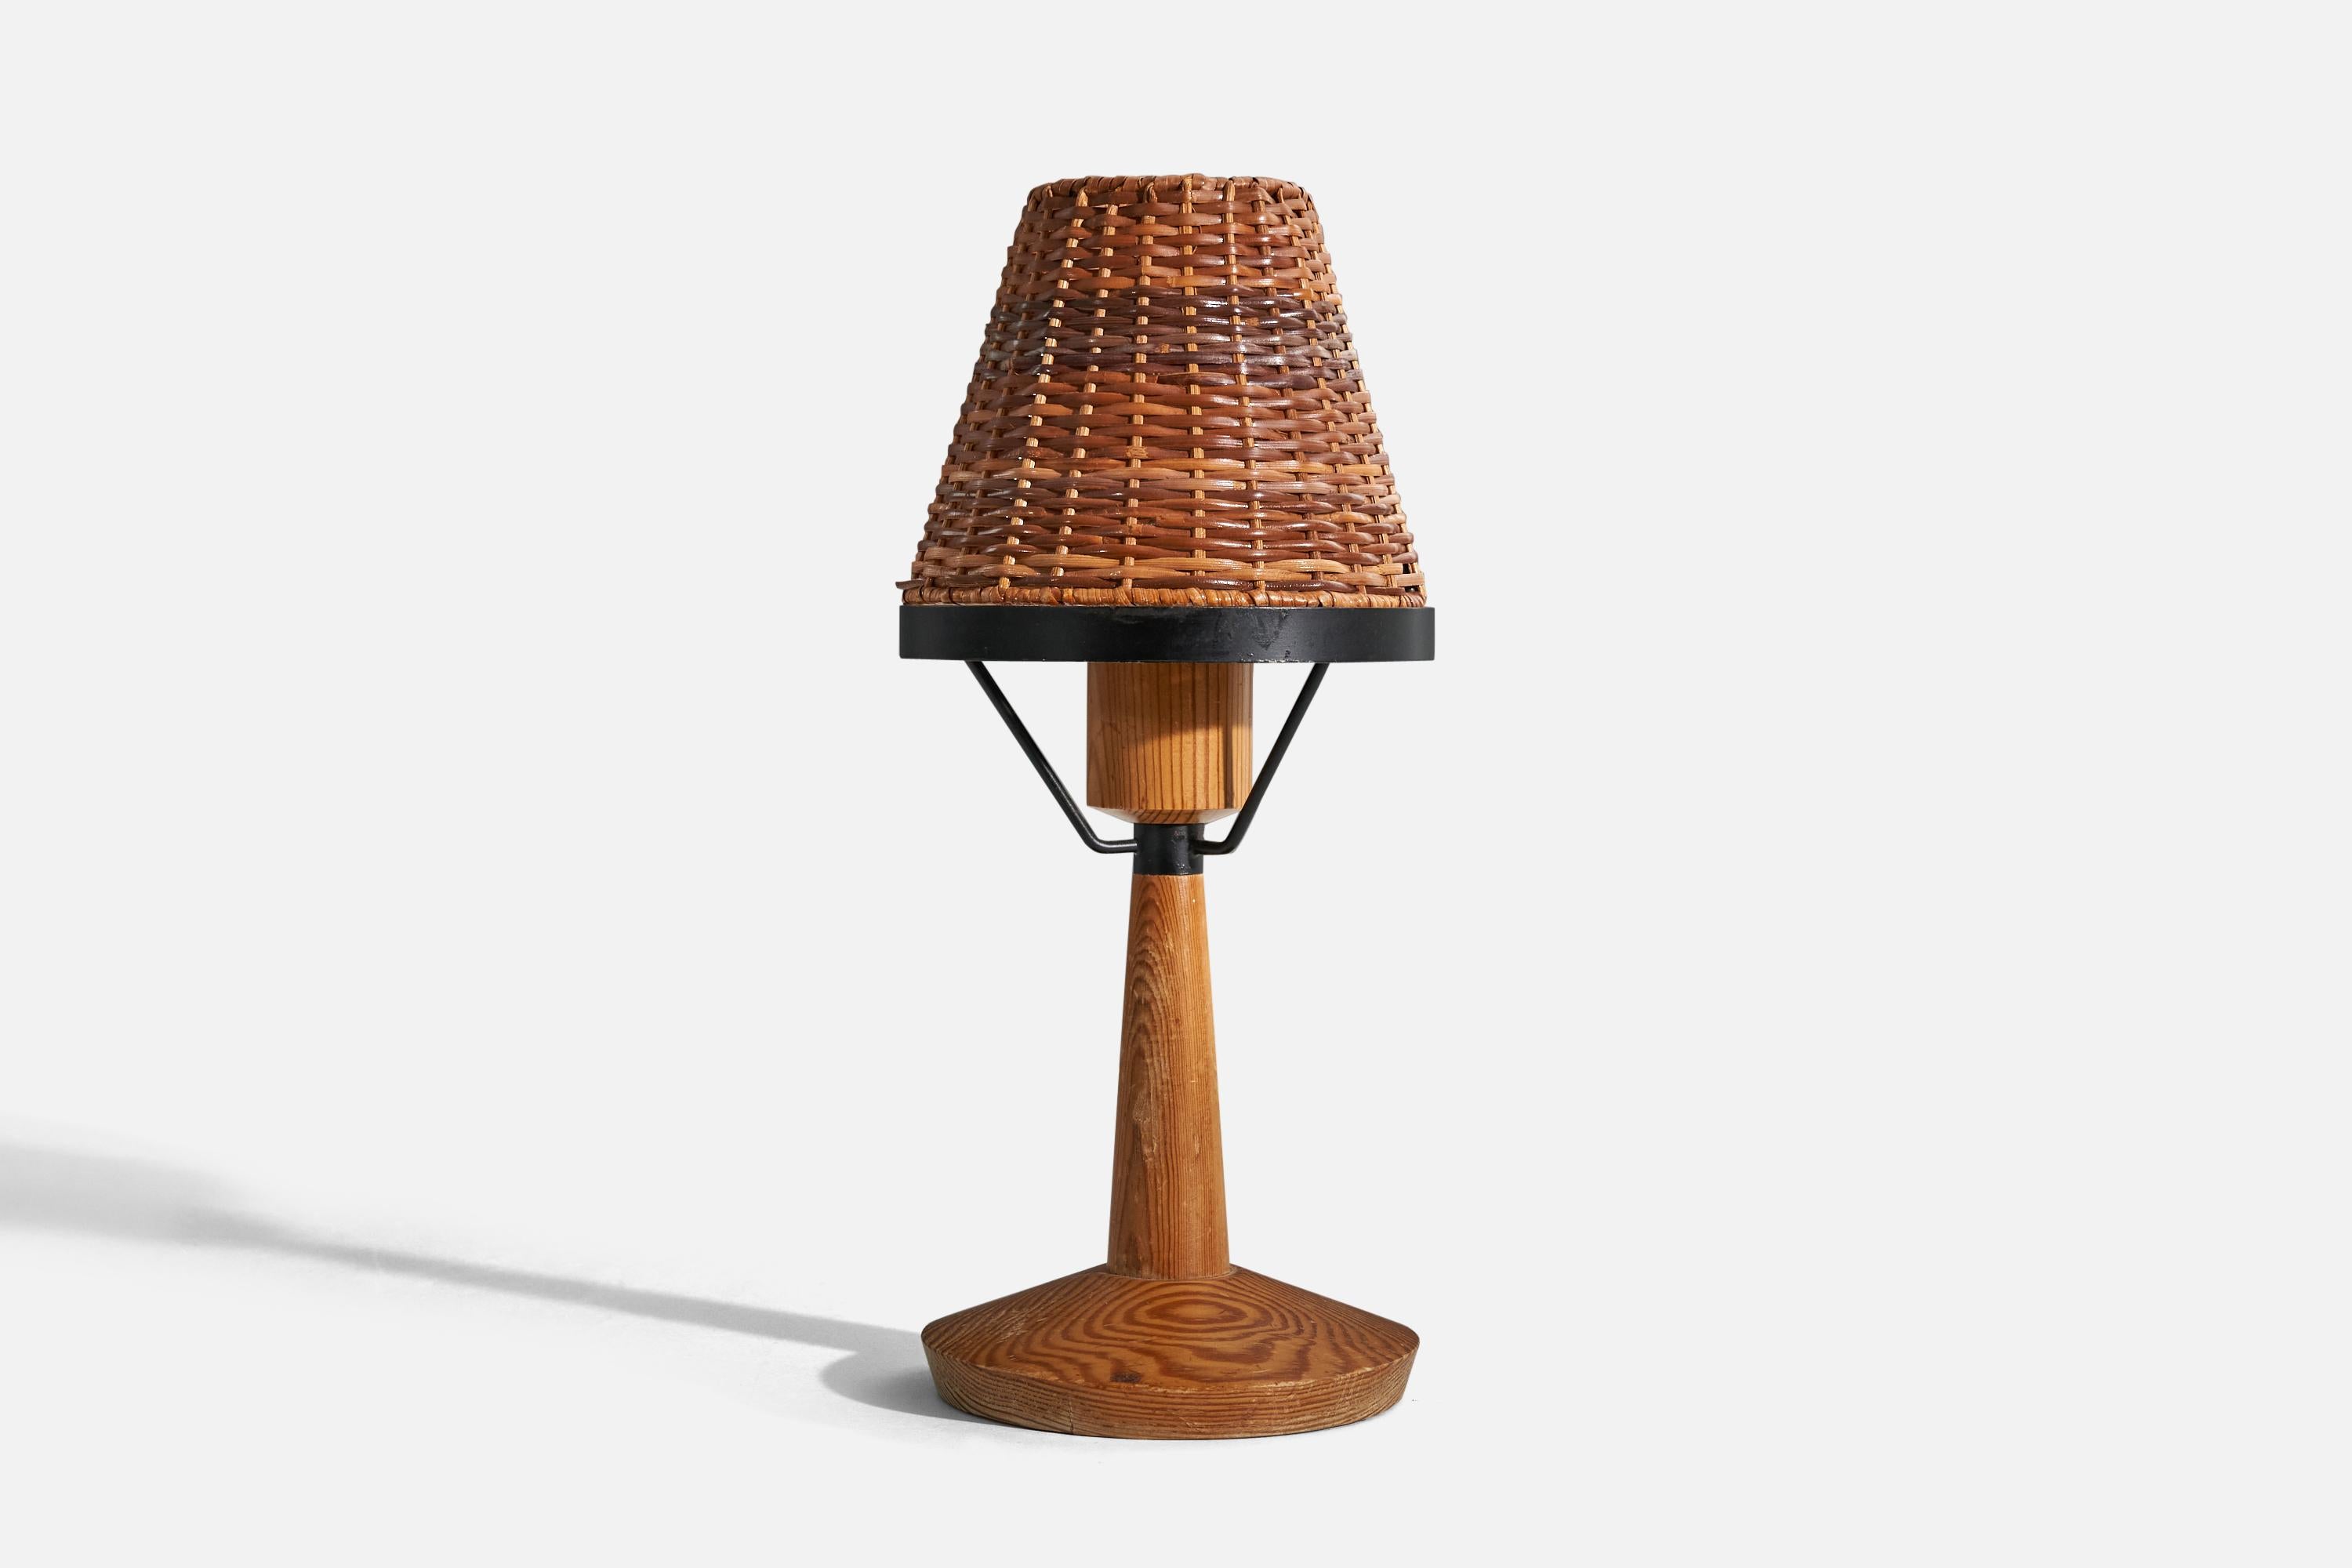 A pine, rattan and metal table lamp designed and produced in Sweden, c. 1970s.

Sold without lampshade. 
Dimensions of Lamp (inches) : 9.31 x 6 x 6 (H x W x D)
Dimensions of Shade (inches) : 3.12 x 5.75 x 4.87 (T x B x S)
Dimension of Lamp with